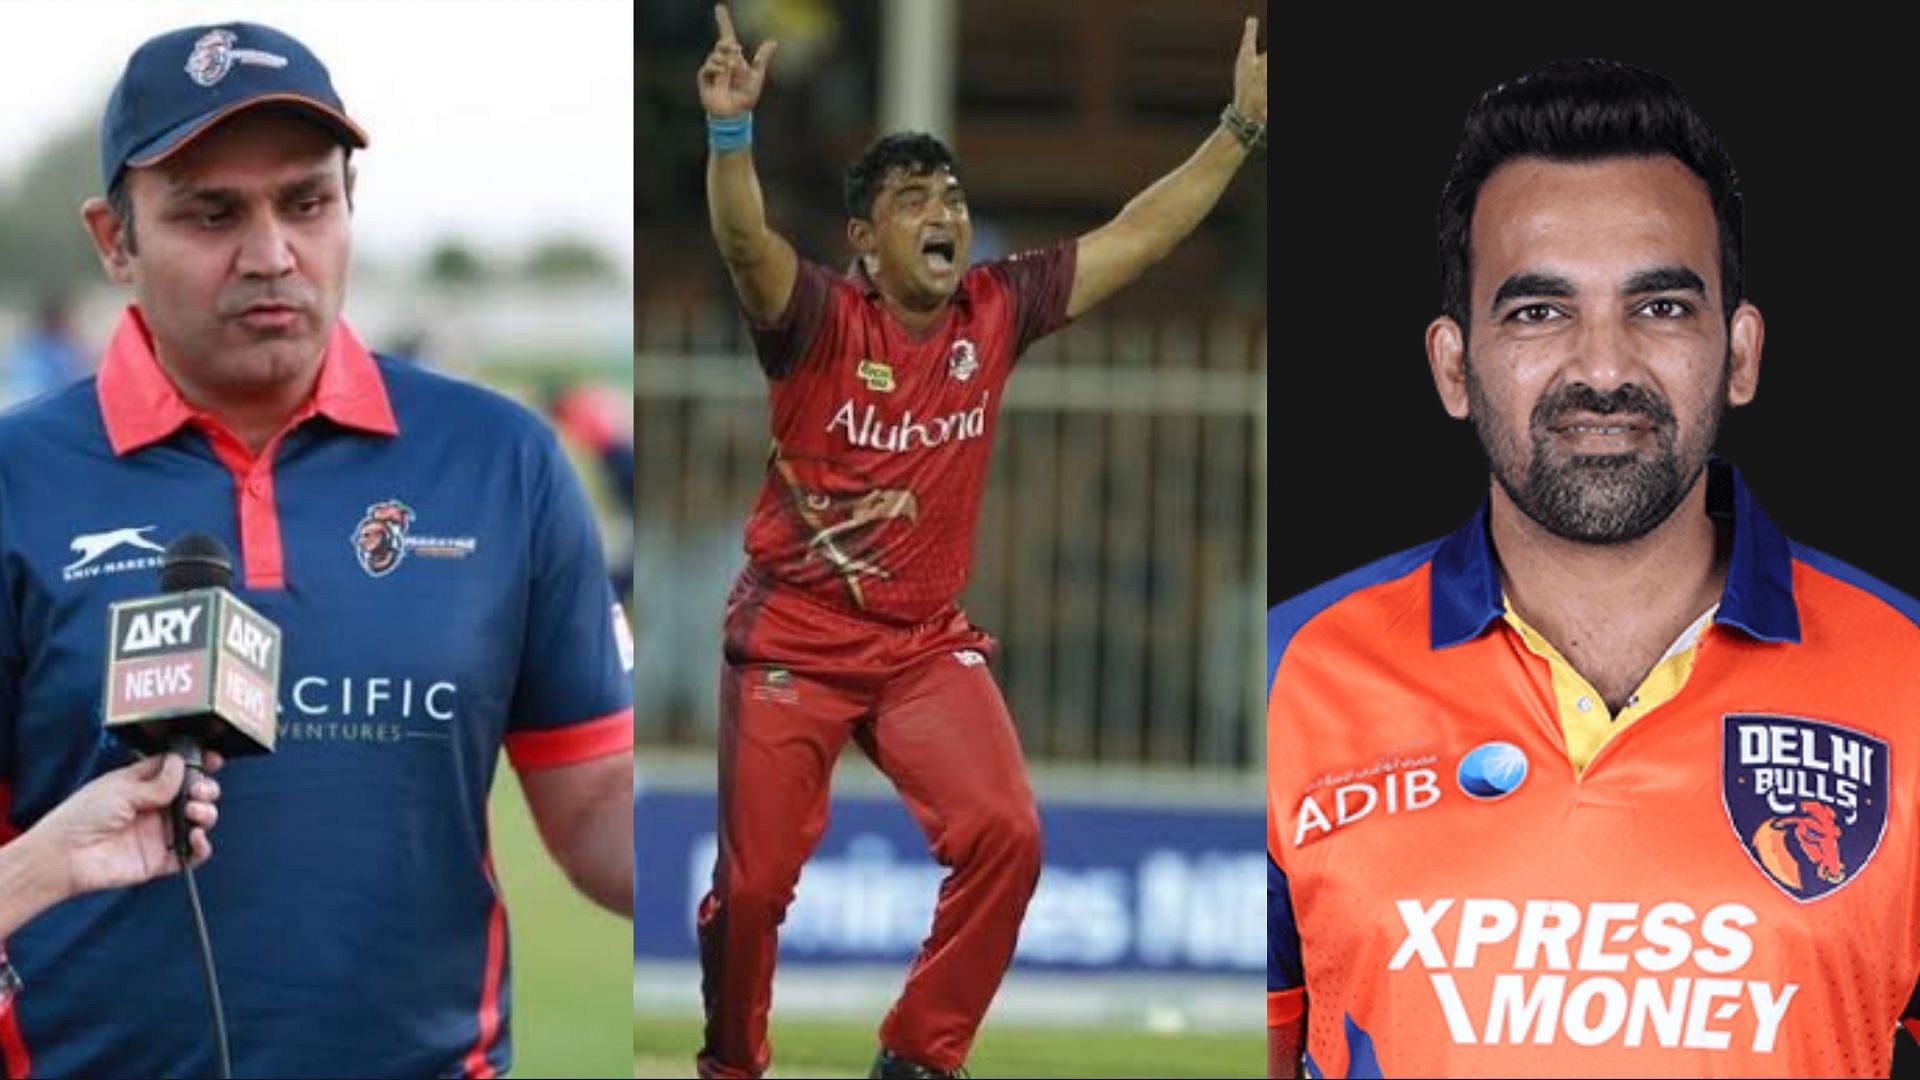 The likes of Virender Sehwag, Pravin Tambe and Zaheer Khan have played in Abu Dhabi T10 League